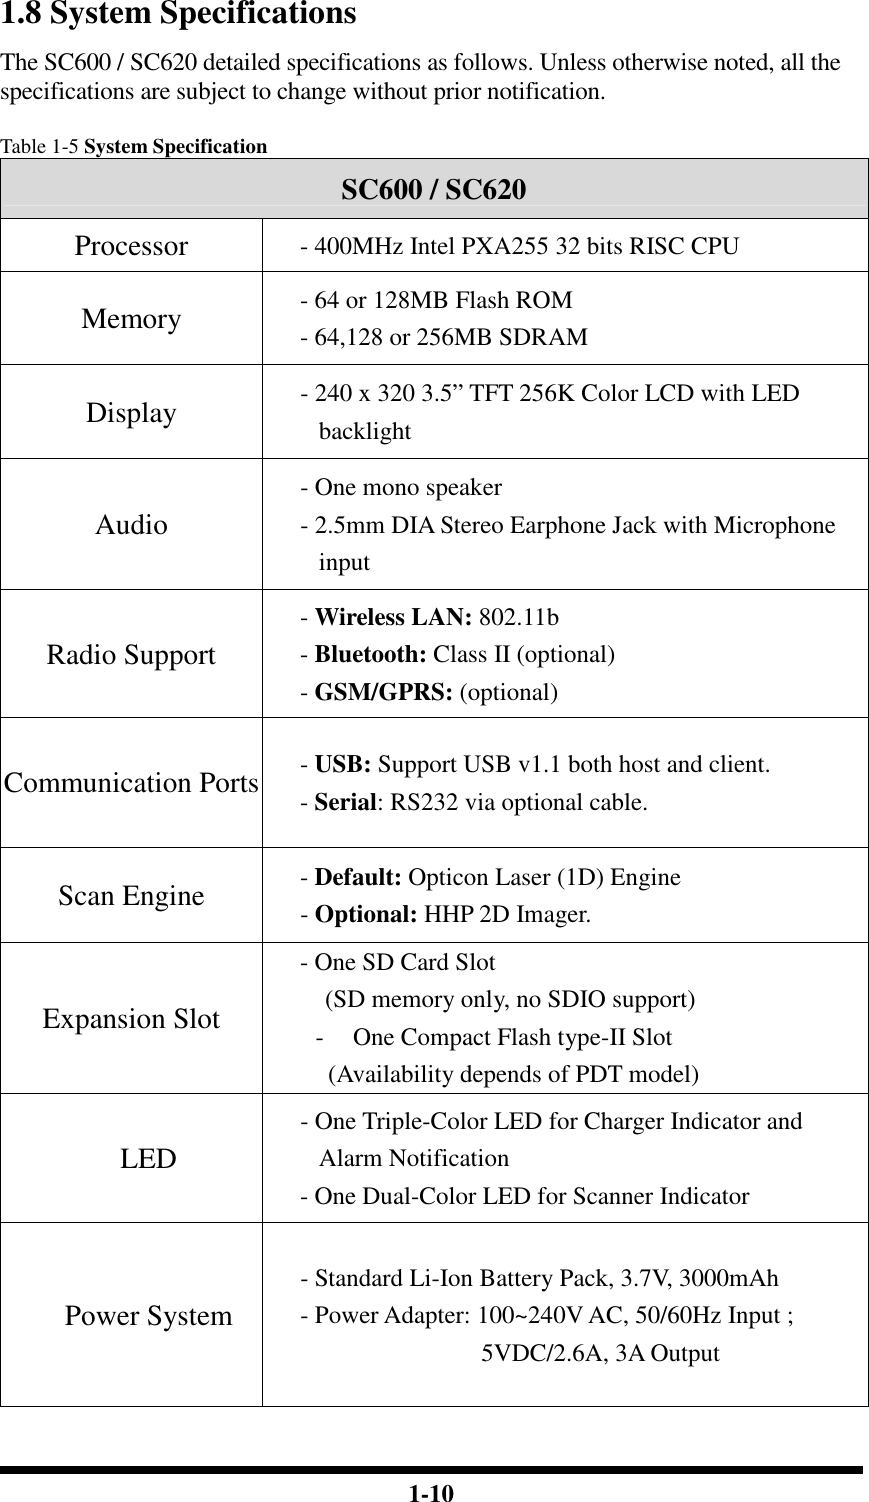  1-10 1.8 System Specifications The SC600 / SC620 detailed specifications as follows. Unless otherwise noted, all the specifications are subject to change without prior notification.  Table 1-5 System Specification SC600 / SC620 Processor - 400MHz Intel PXA255 32 bits RISC CPU Memory - 64 or 128MB Flash ROM - 64,128 or 256MB SDRAM Display - 240 x 320 3.5” TFT 256K Color LCD with LED backlight Audio - One mono speaker - 2.5mm DIA Stereo Earphone Jack with Microphone input Radio Support - Wireless LAN: 802.11b - Bluetooth: Class II (optional) - GSM/GPRS: (optional) Communication Ports - USB: Support USB v1.1 both host and client. - Serial: RS232 via optional cable. Scan Engine - Default: Opticon Laser (1D) Engine - Optional: HHP 2D Imager. Expansion Slot - One SD Card Slot (SD memory only, no SDIO support) - One Compact Flash type-II Slot (Availability depends of PDT model) LED - One Triple-Color LED for Charger Indicator and Alarm Notification - One Dual-Color LED for Scanner Indicator Power System - Standard Li-Ion Battery Pack, 3.7V, 3000mAh - Power Adapter: 100~240V AC, 50/60Hz Input ; 5VDC/2.6A, 3A Output 